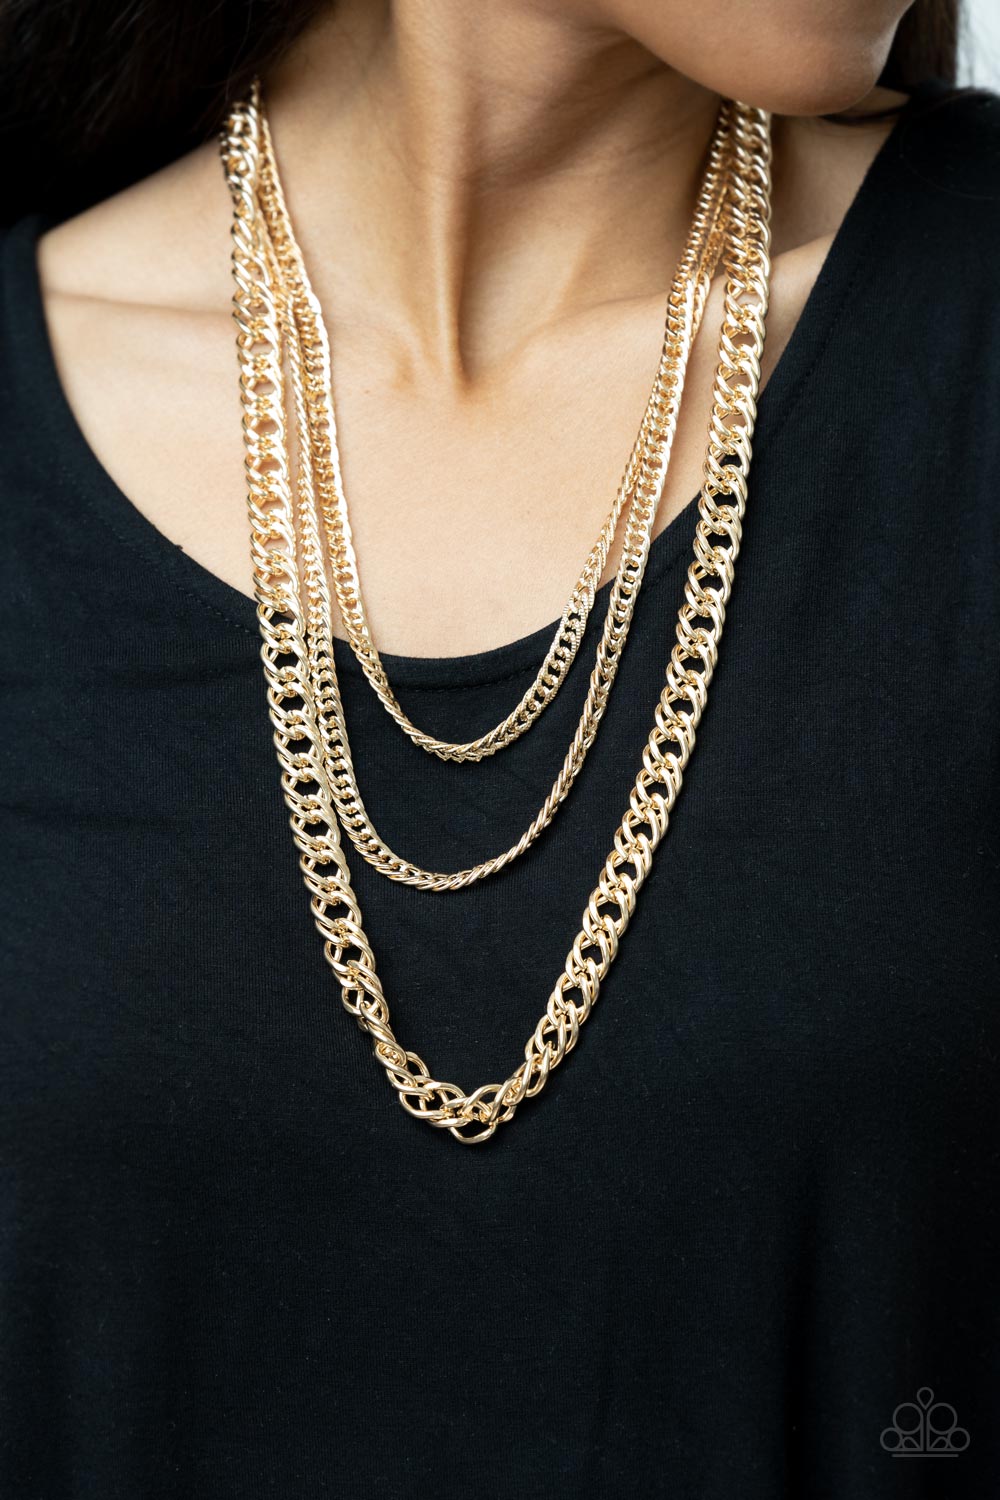 Chain of Champions - Gold 3 tier Necklace